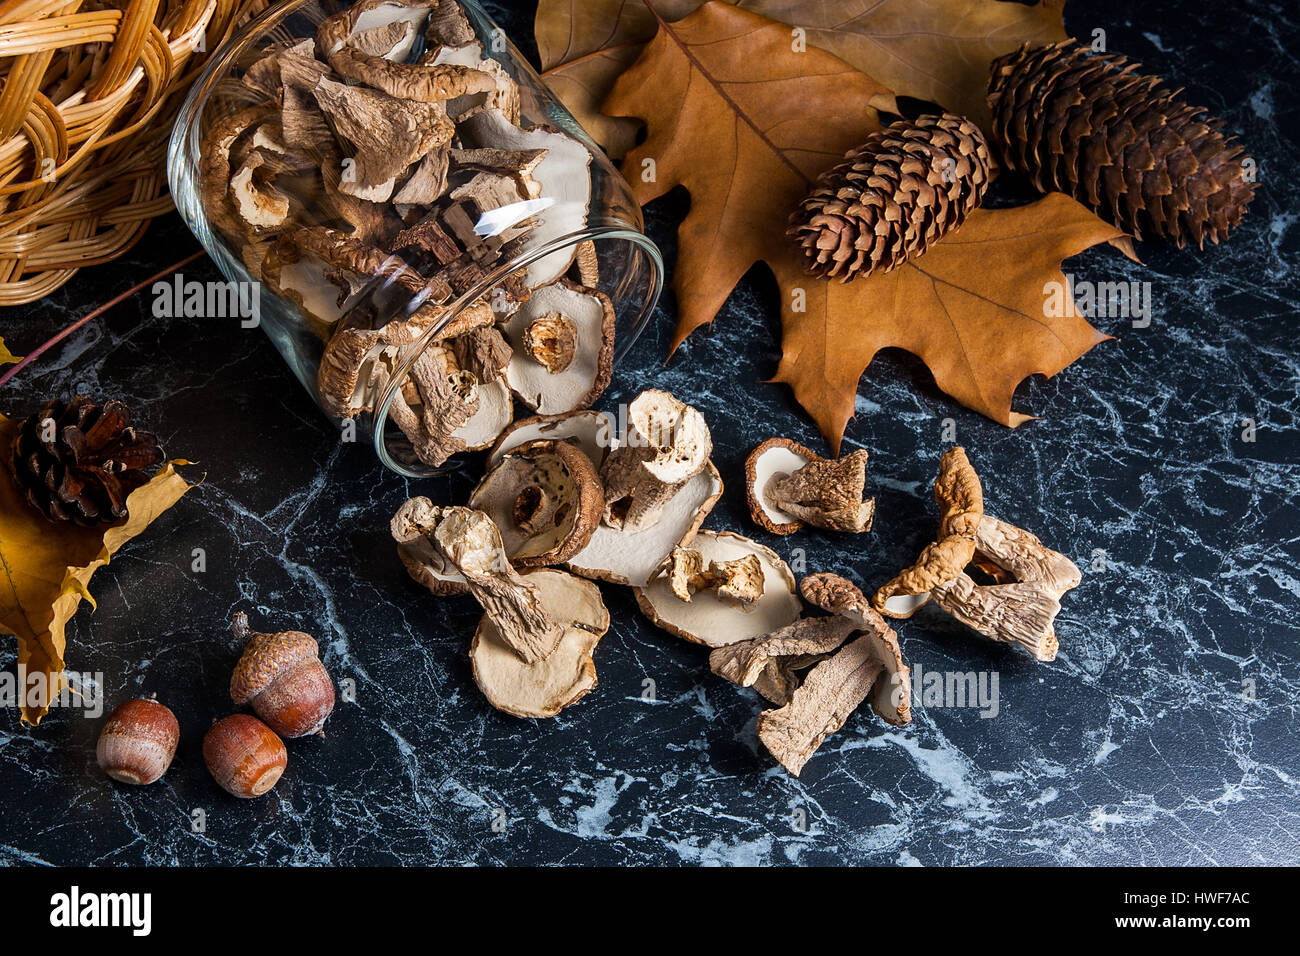 Dry white wild mushrooms in glass jar and on the table. Yellow wooden basket on back background, several dry oak leaves, acorns and fir cones. Composi Stock Photo